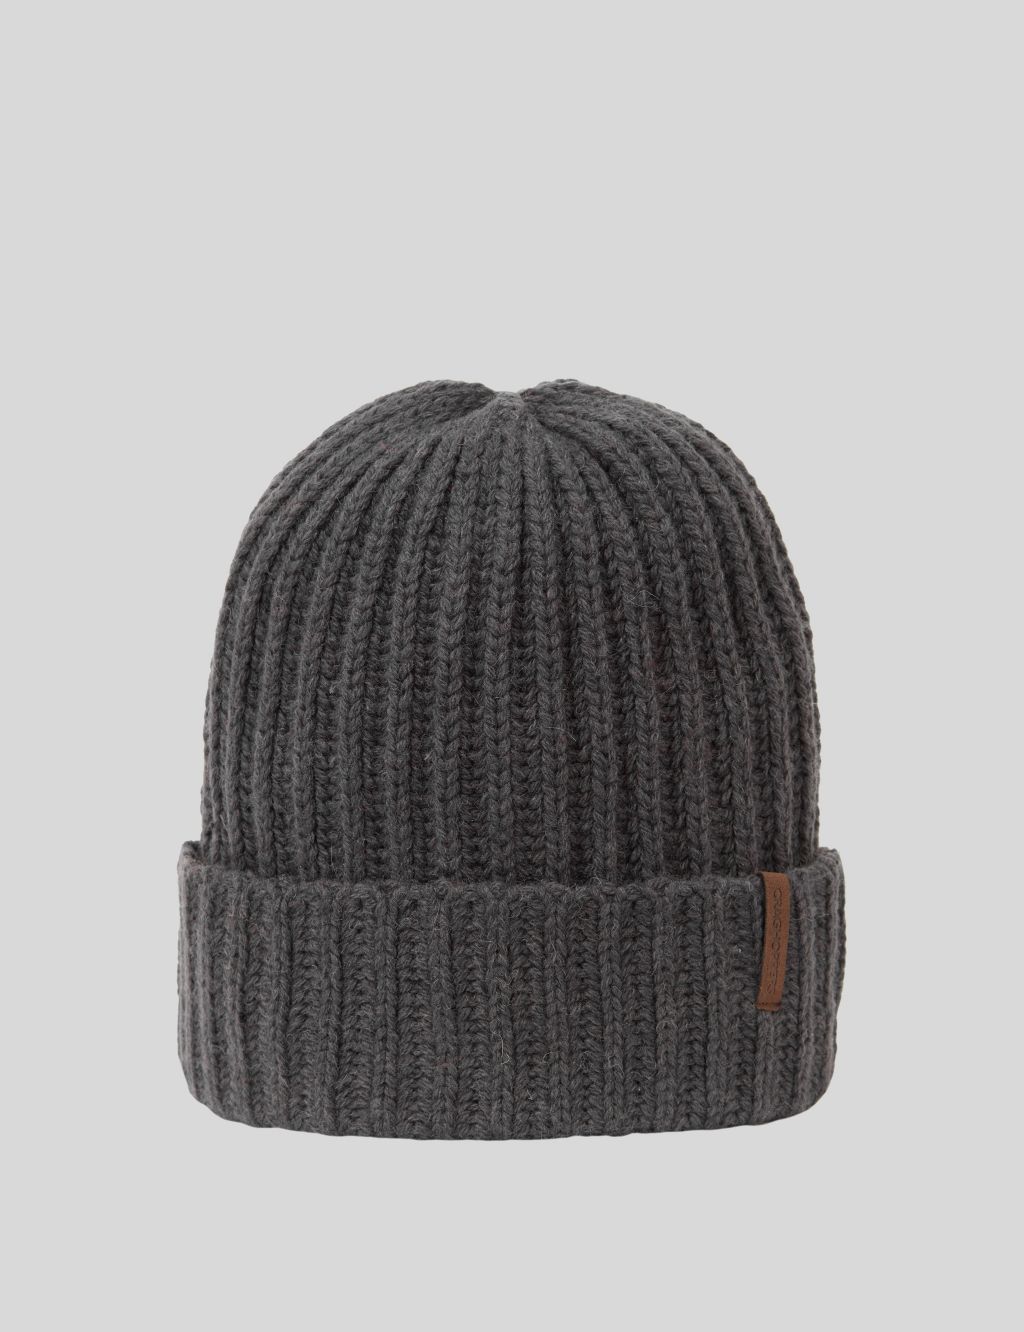 Wool Blend Knitted Beanie Hat